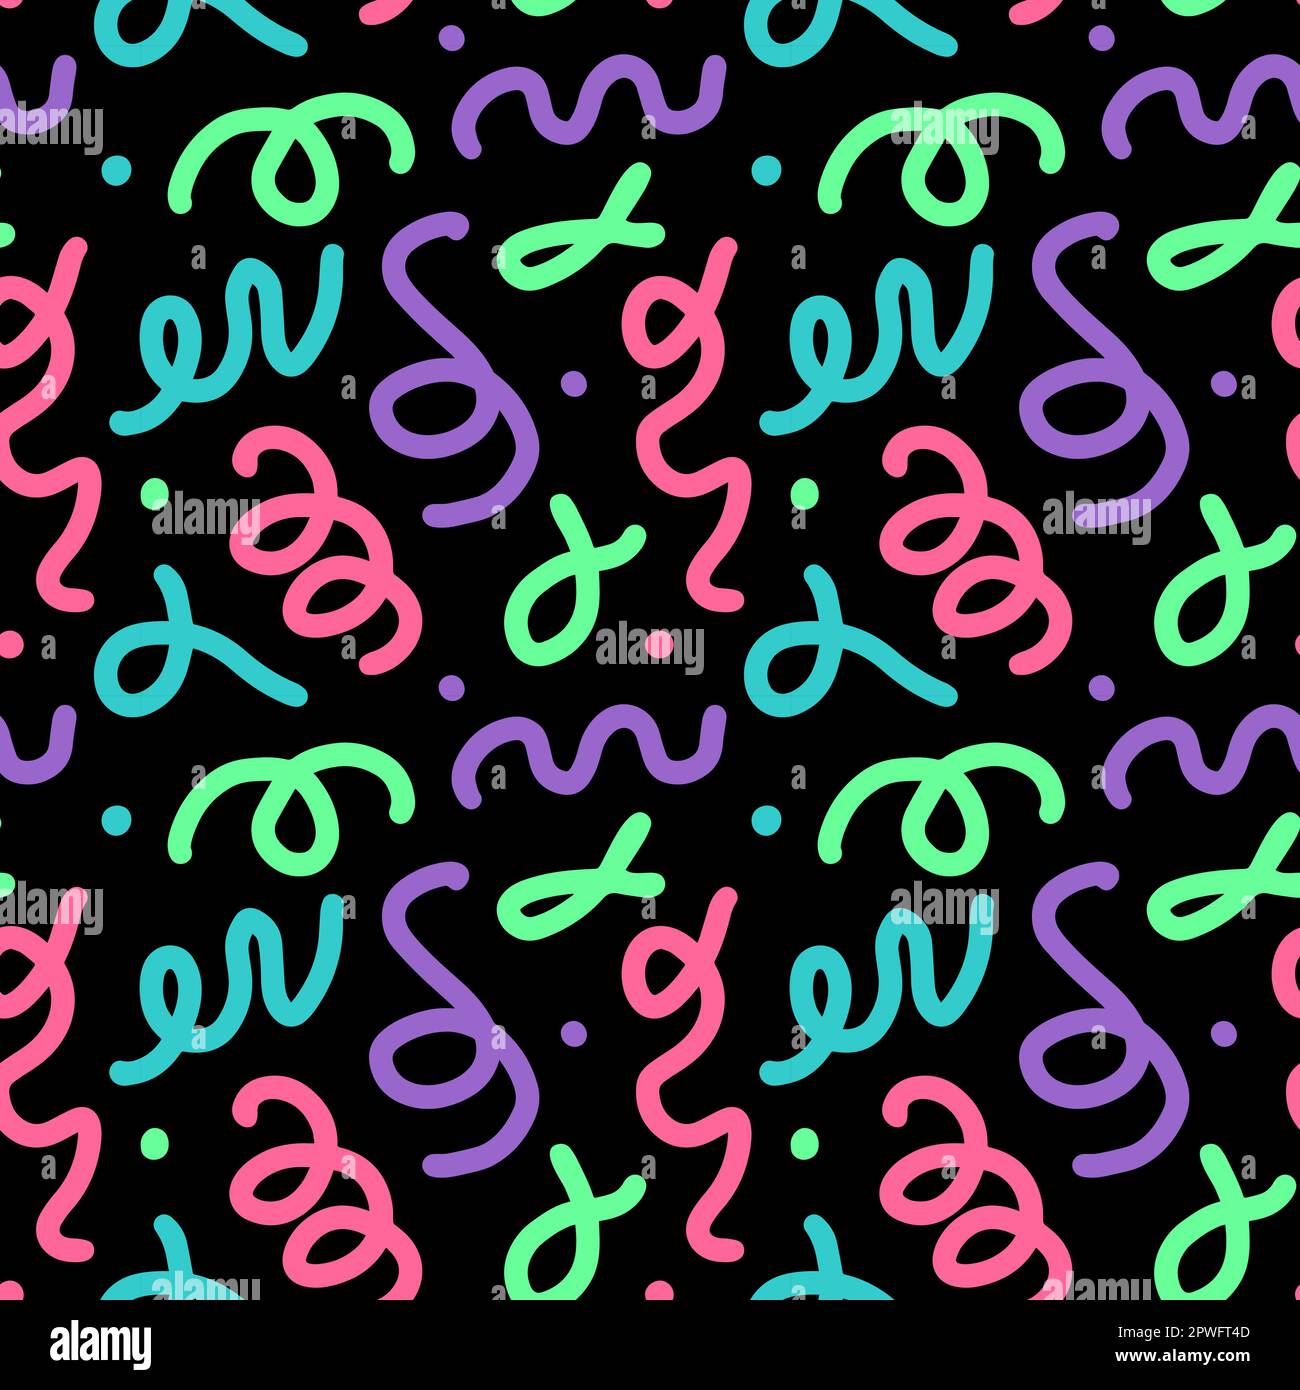 Colorful line doodle seamless pattern. Creative abstract art background ...